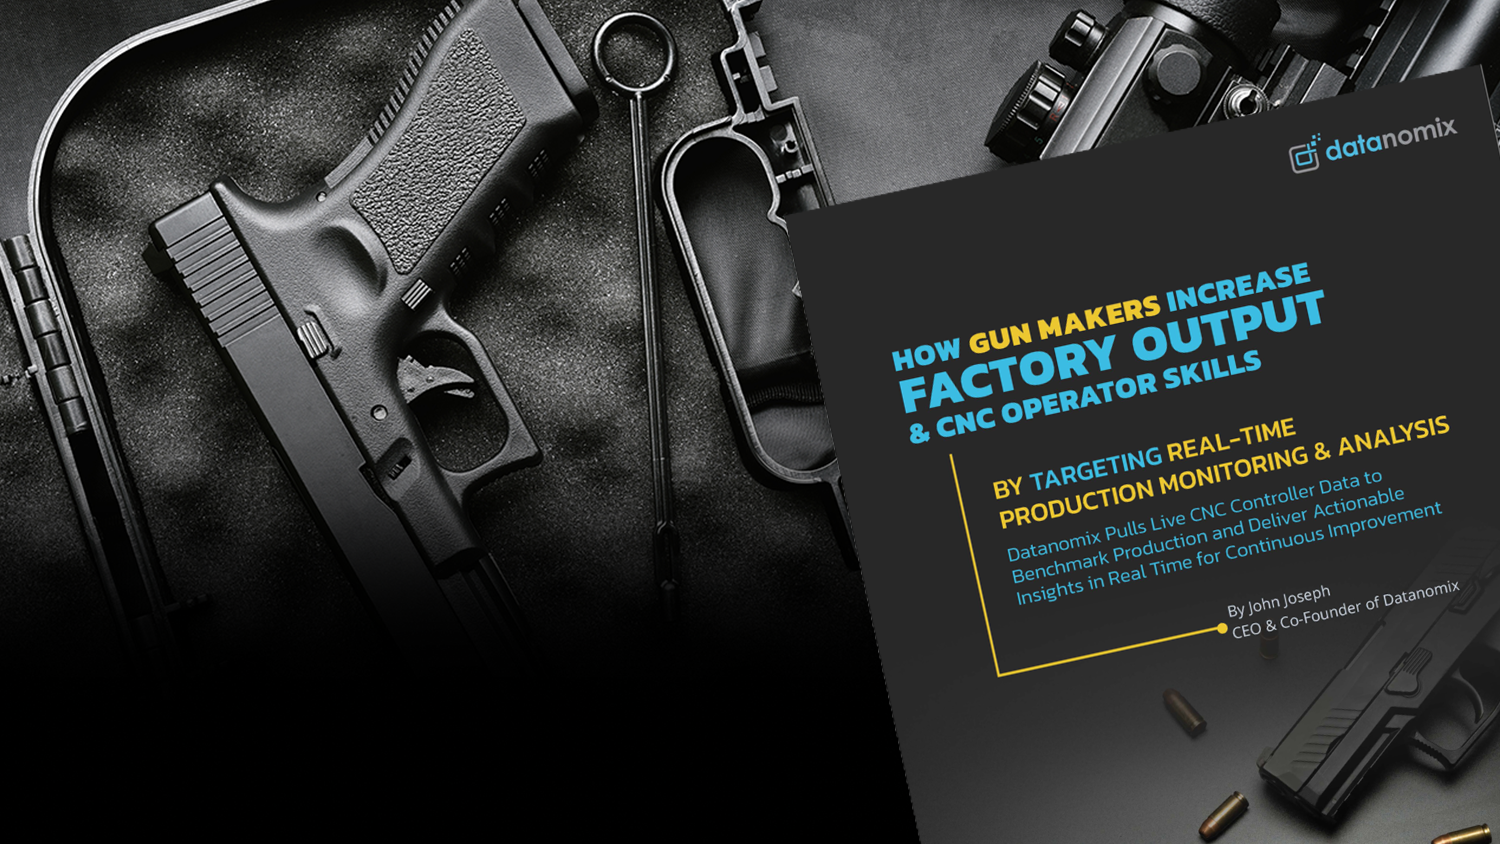 THINK PIECE: How Gun Makers Use Datanomix to Increase Factory Output & CNC Operator Skills